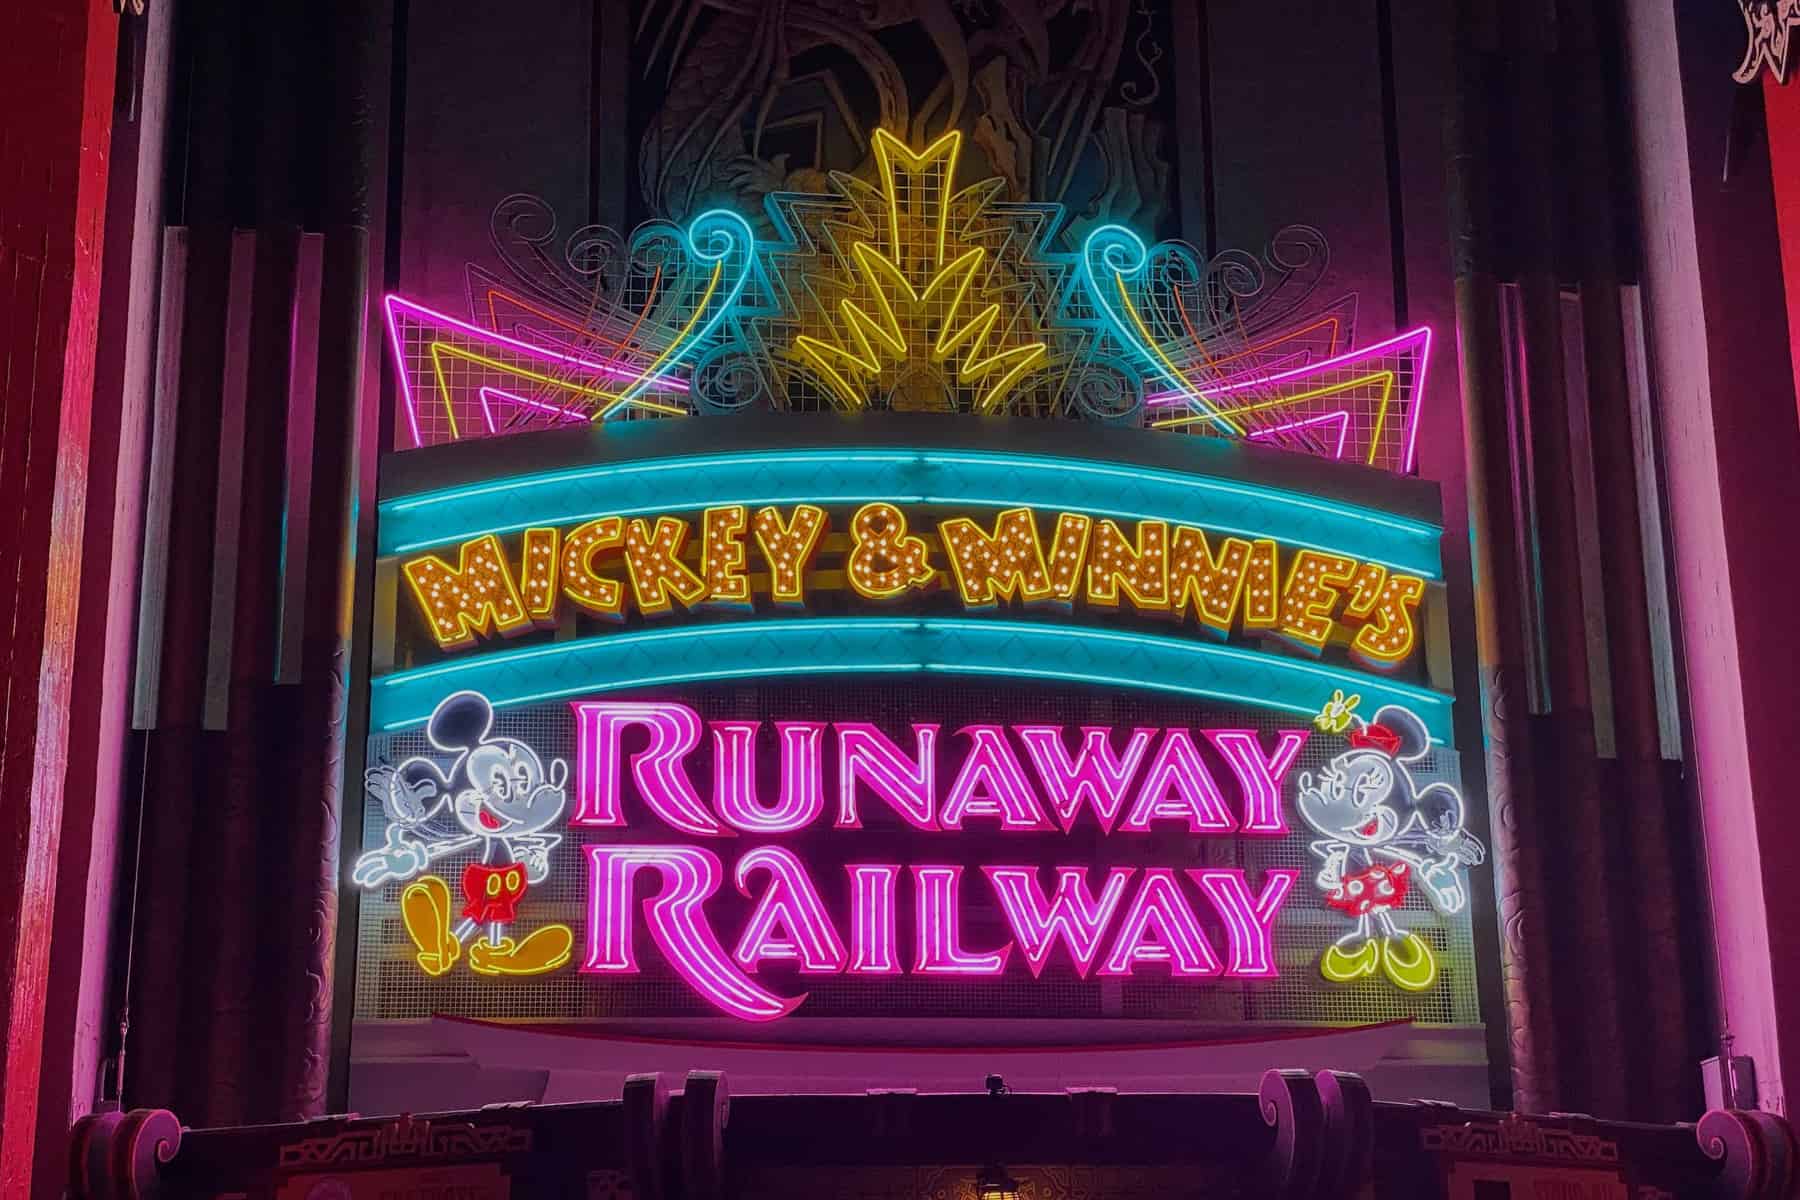 Mickey & Minnie’s Runaway Railway (facts about the popular trackless ride)